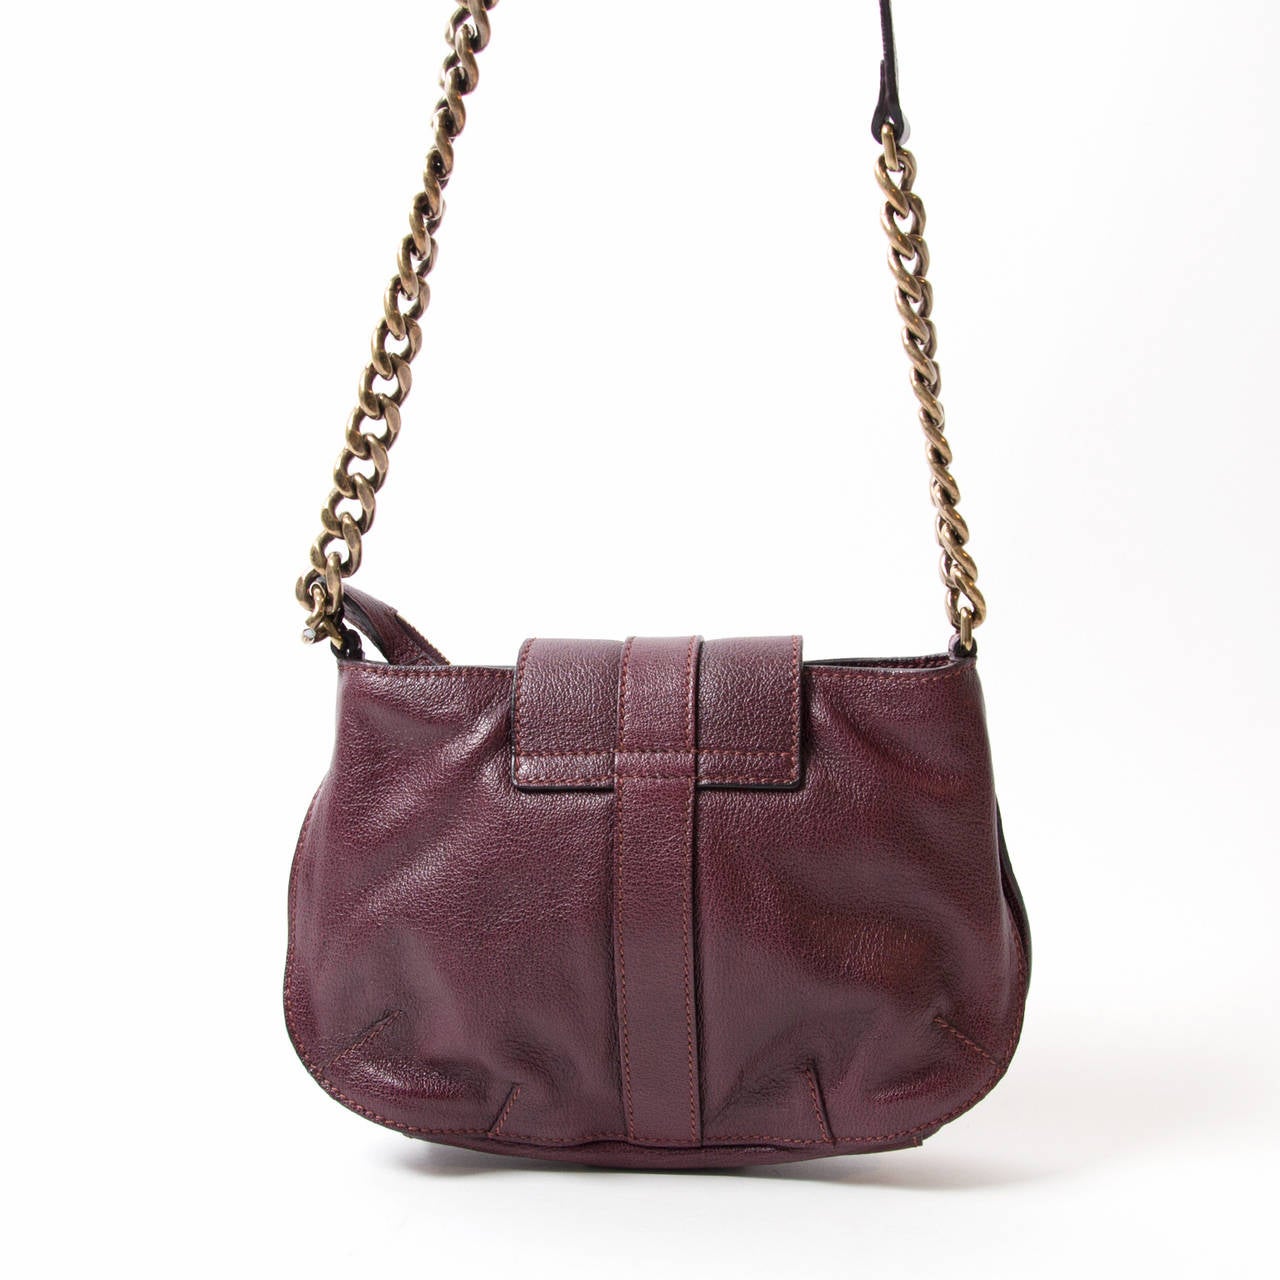 Buffalo Leather Shoulder Bag - Plum. Plum buffalo leather with aged brass hardware. Zip-top and leather belt with Burberry engraved turn-lock closure. Adjustable chain/leather shoulder strap. Black novacheck lining with zippered pocket and two open